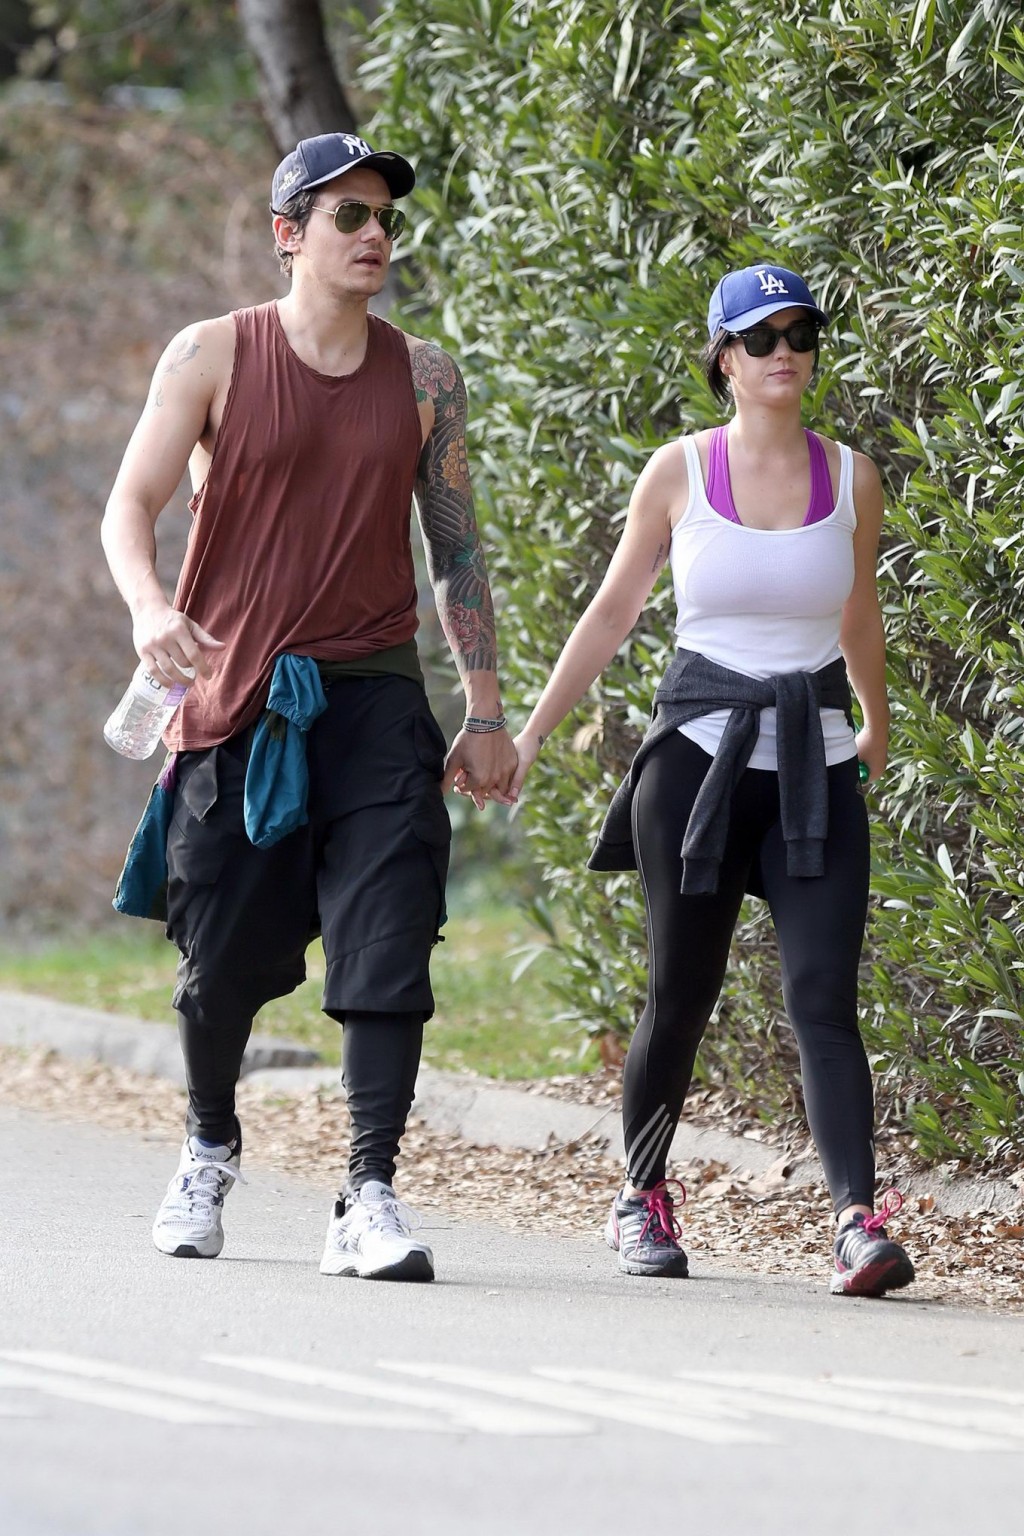 Katy Perry busty  booty wearing tight top and tights while hiking in Los Angeles #75242136